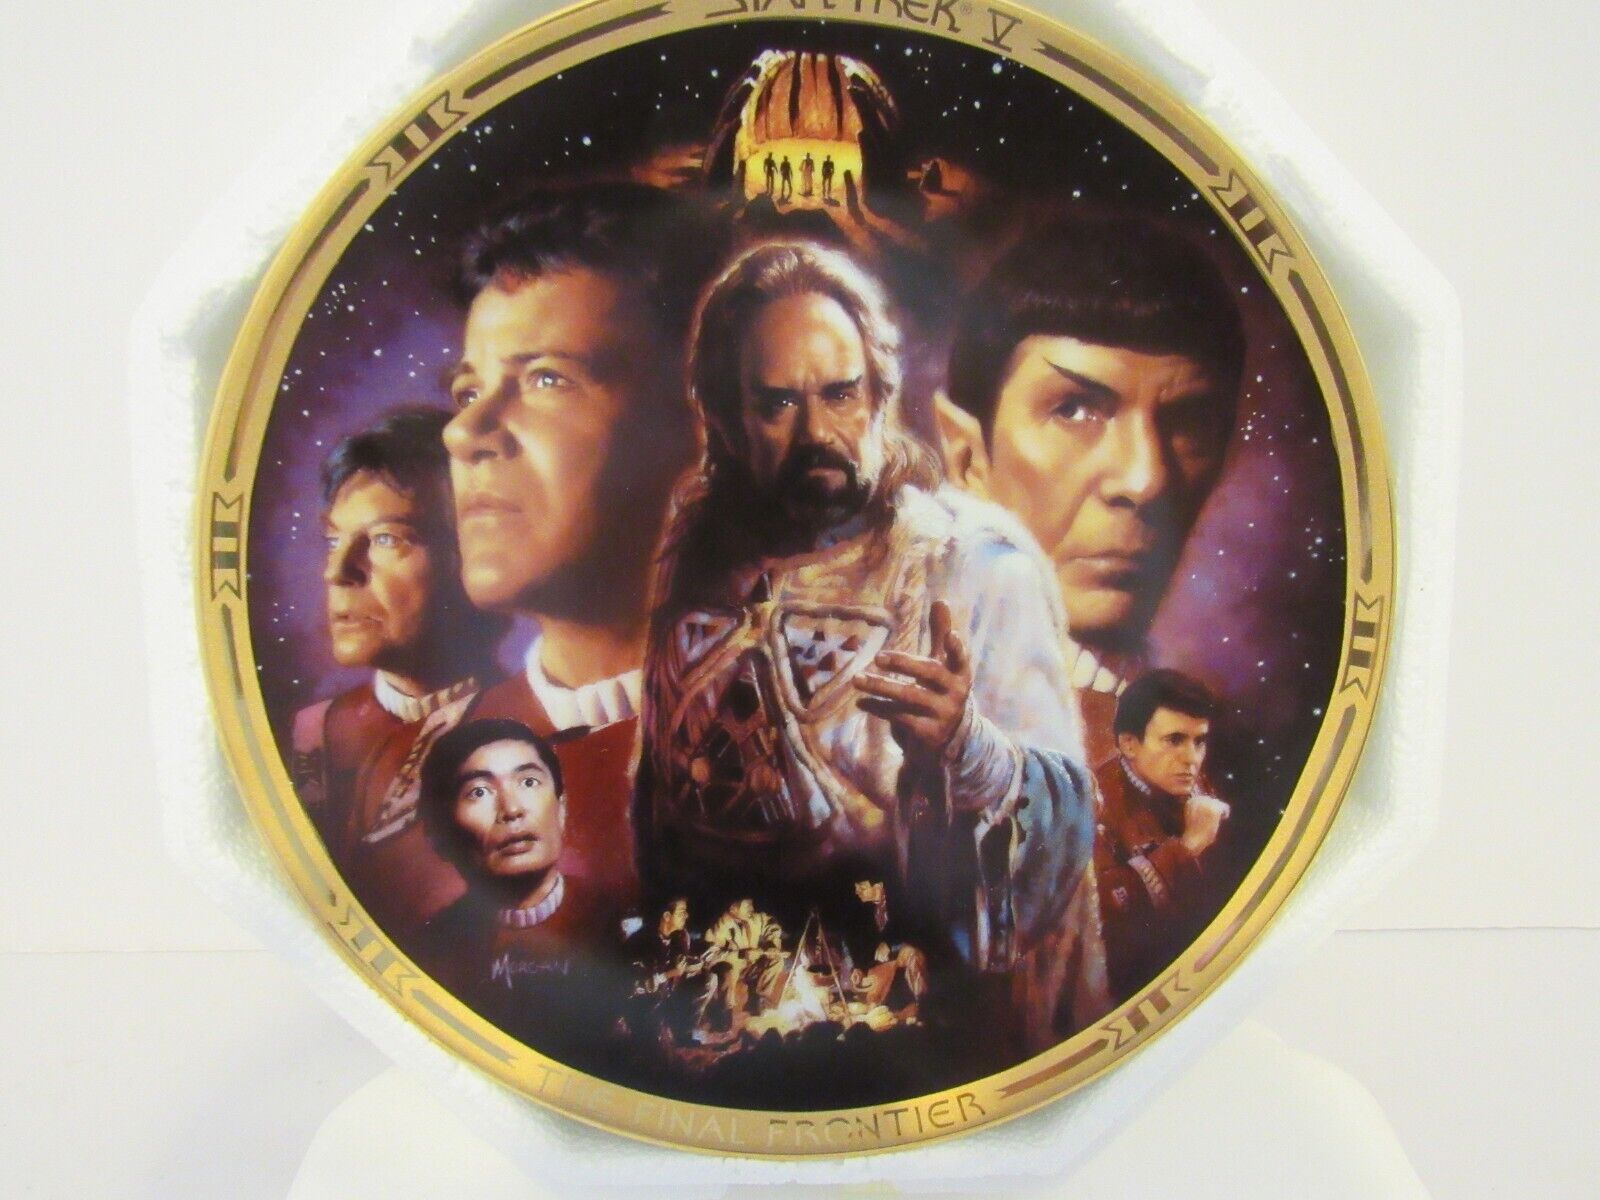 Hamilton Star Trek The Movies Plate Collection The Final Frontier